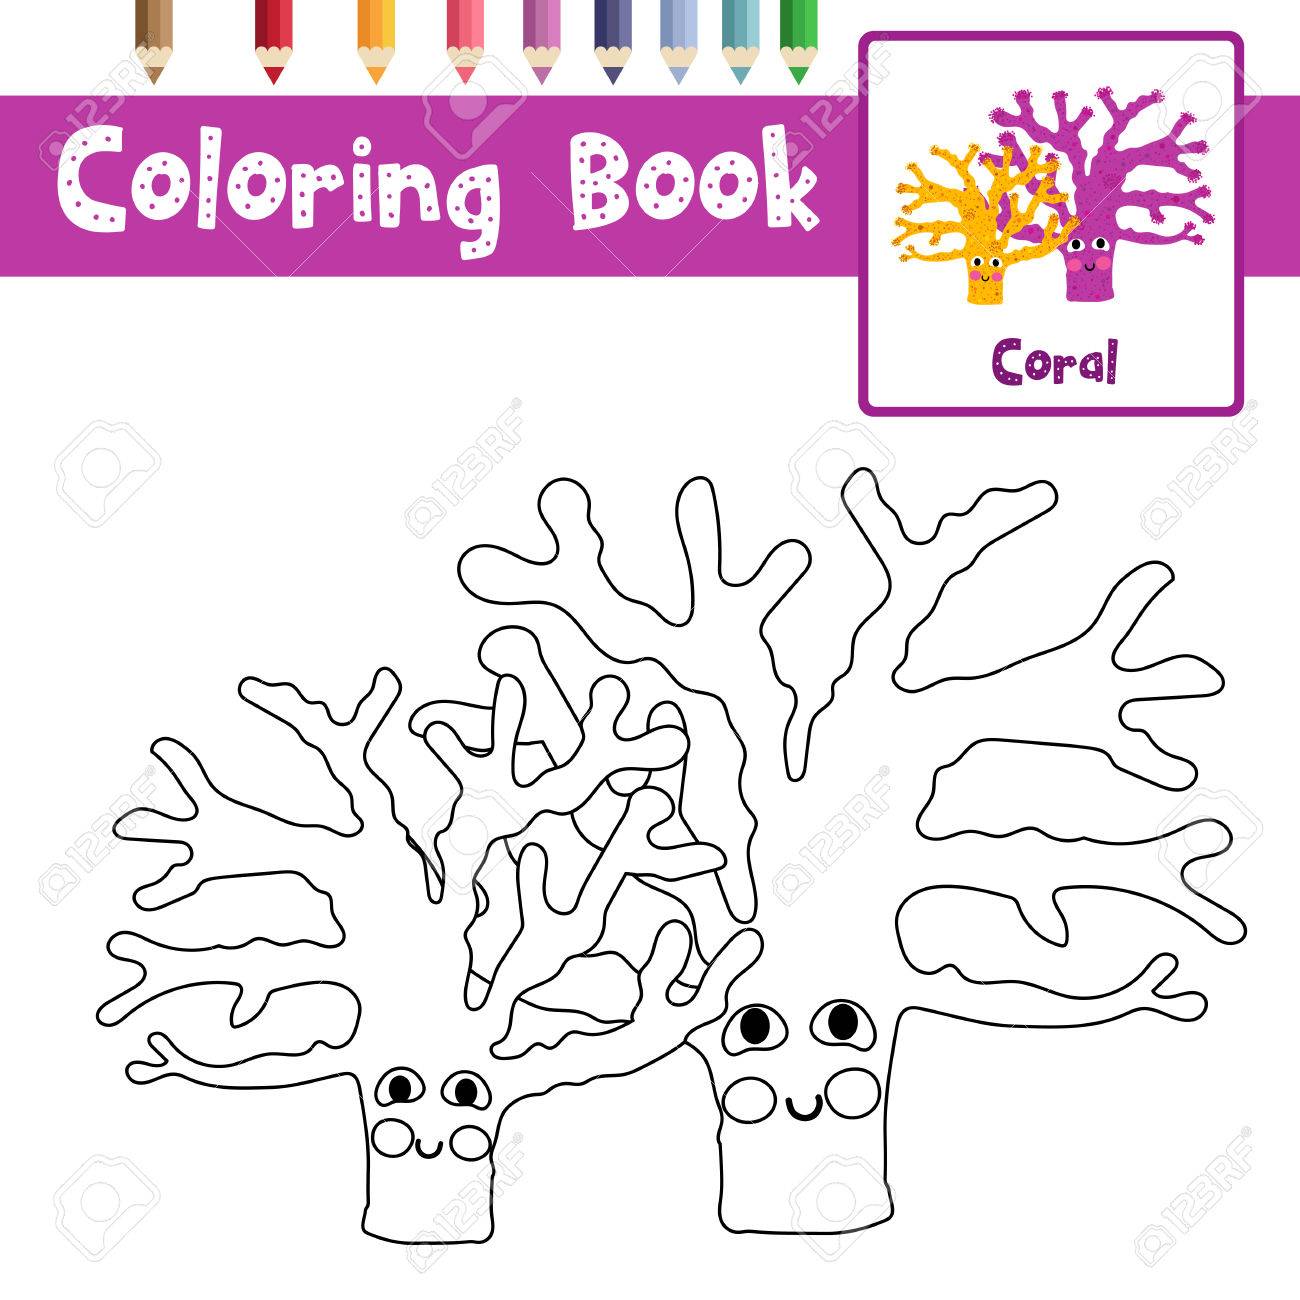 Coloring page of yellow and purple coral animals for preschool kids activity educational worksheet vector illustration royalty free svg cliparts vectors and stock illustration image